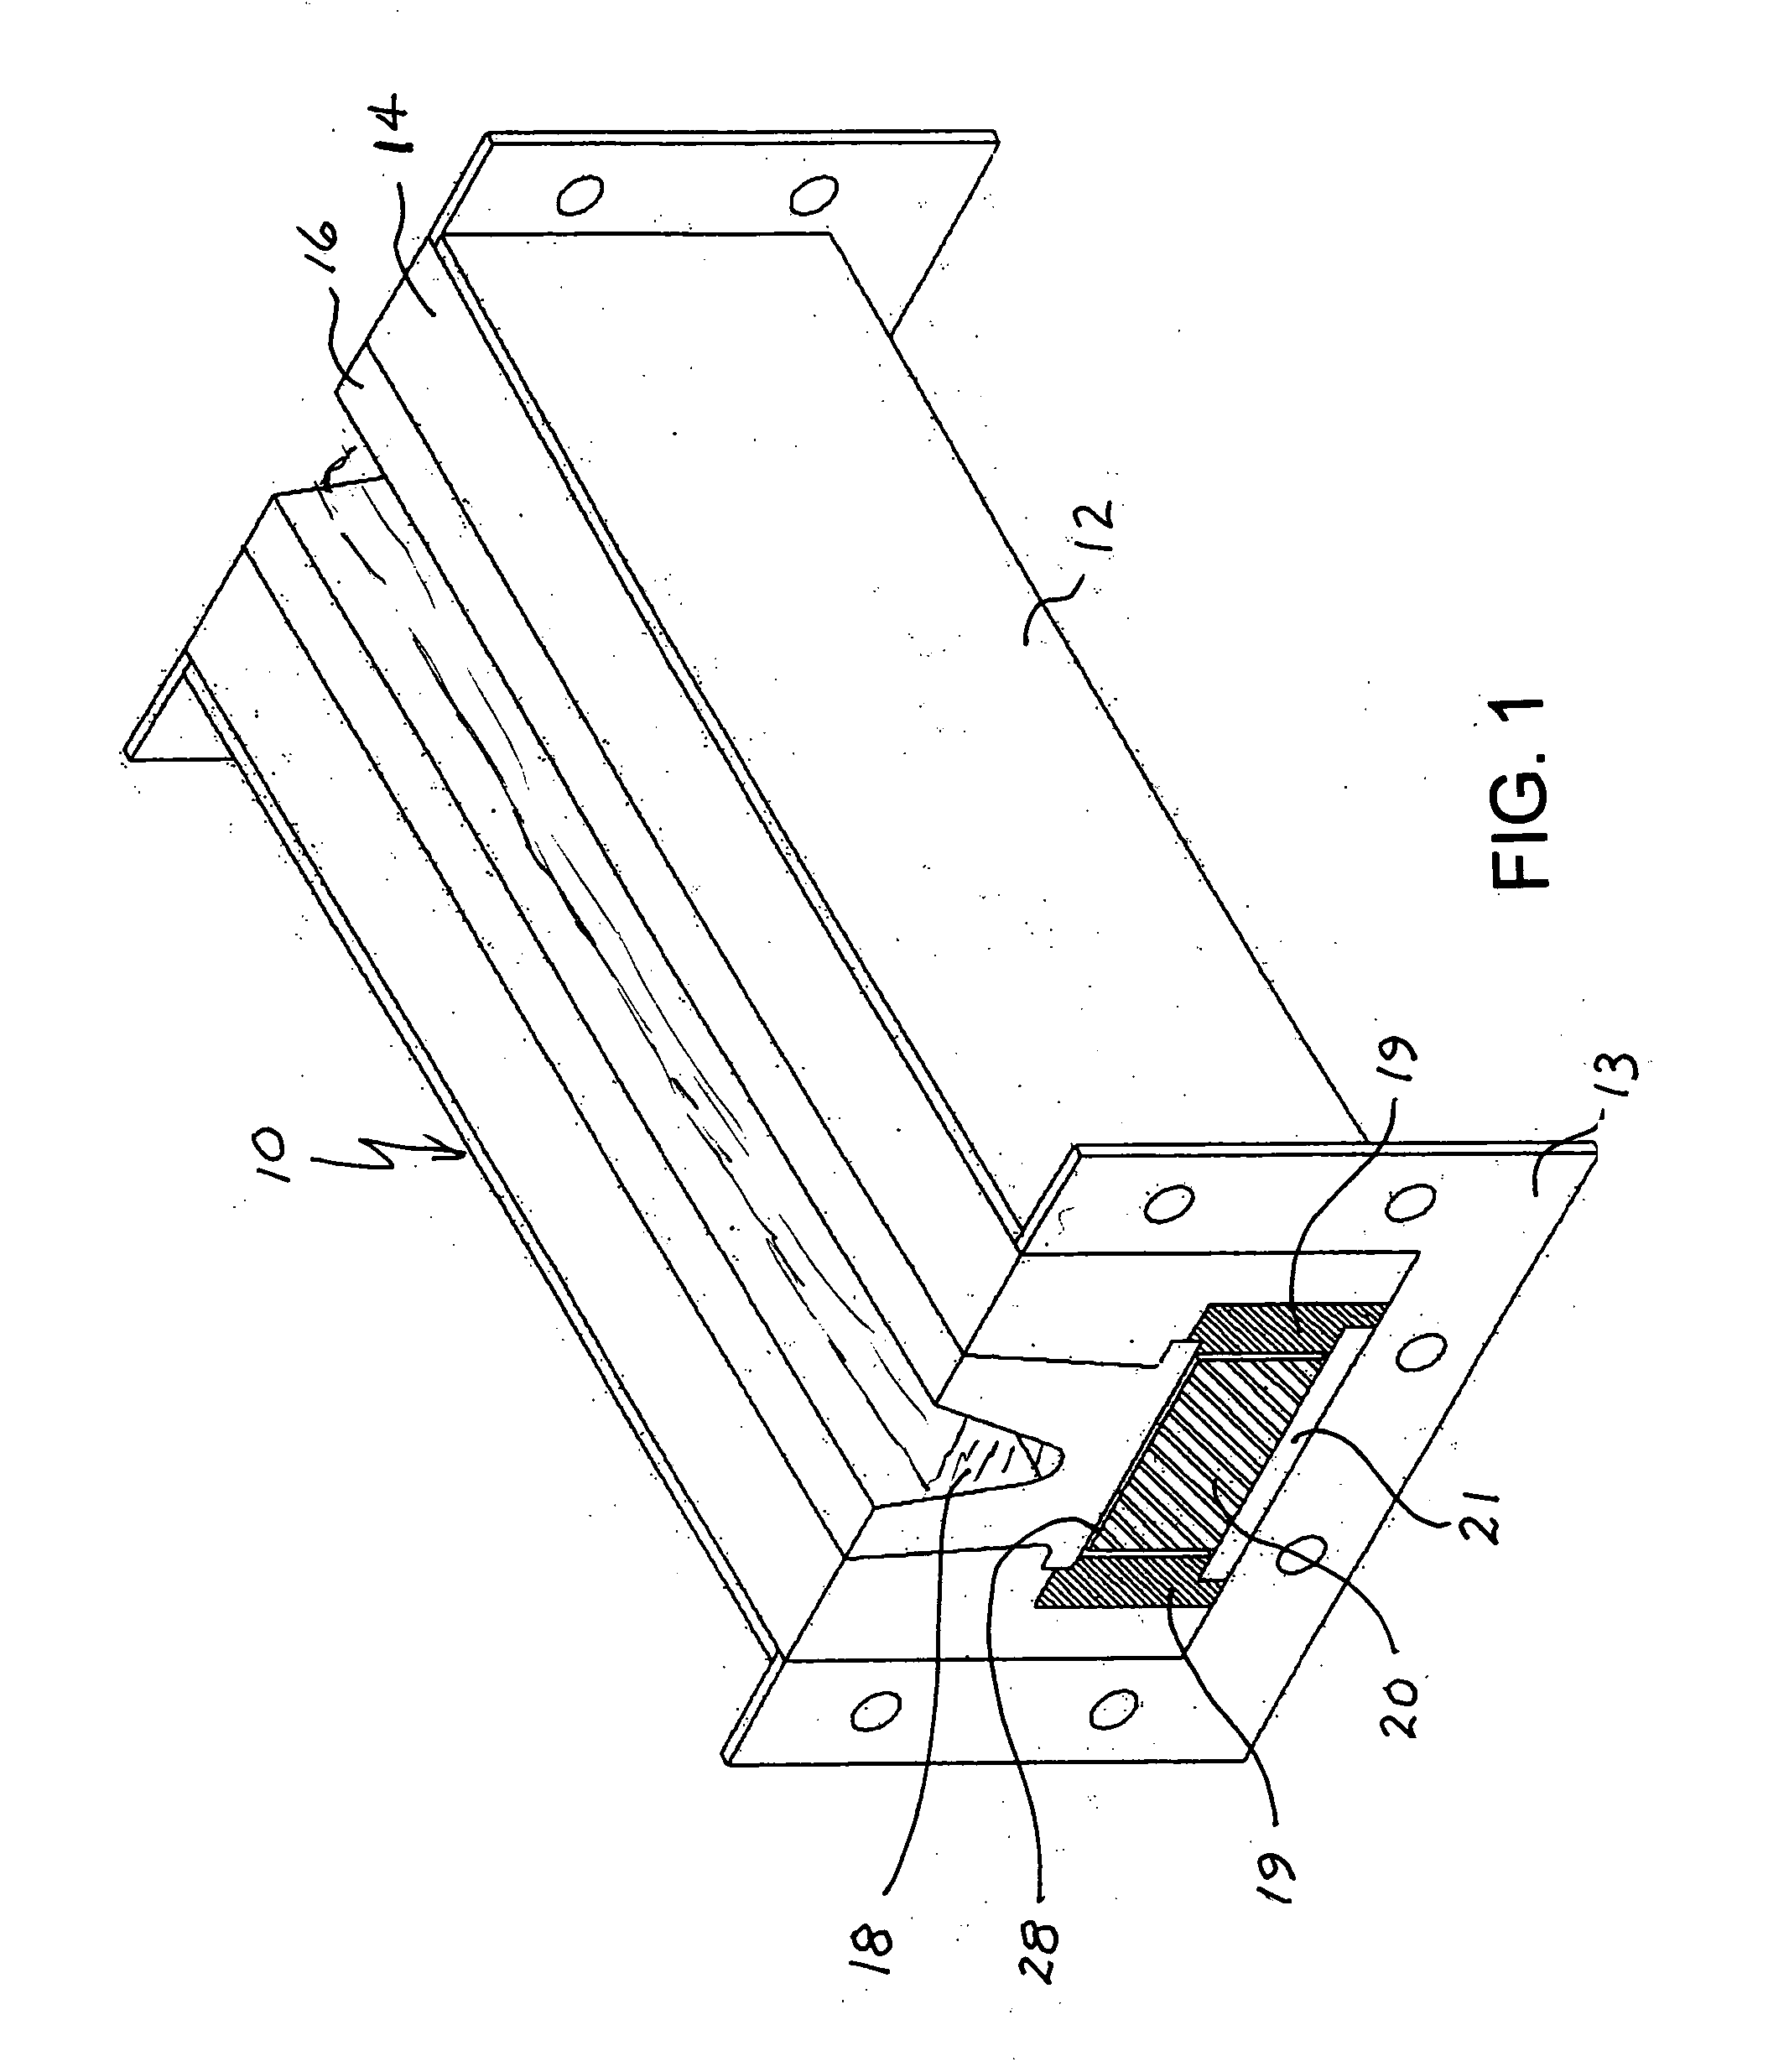 Heated trough for molten metal